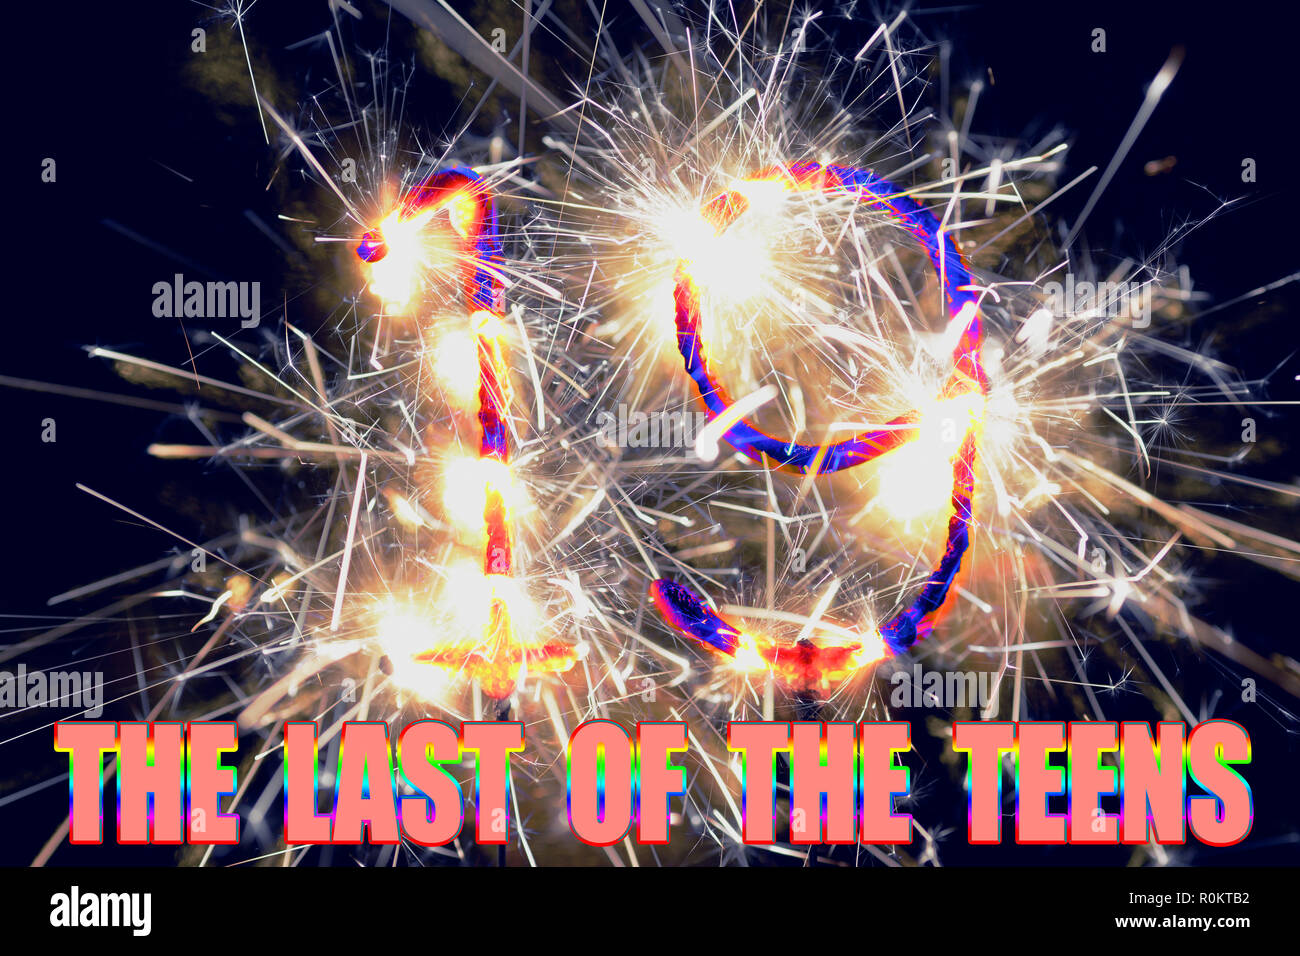 Happy New Year 2019 alternative humor. Sparkler fireworks number 19 burning with text 'Last of the teens'. Vibrant, colorful and full of energy. Stock Photo